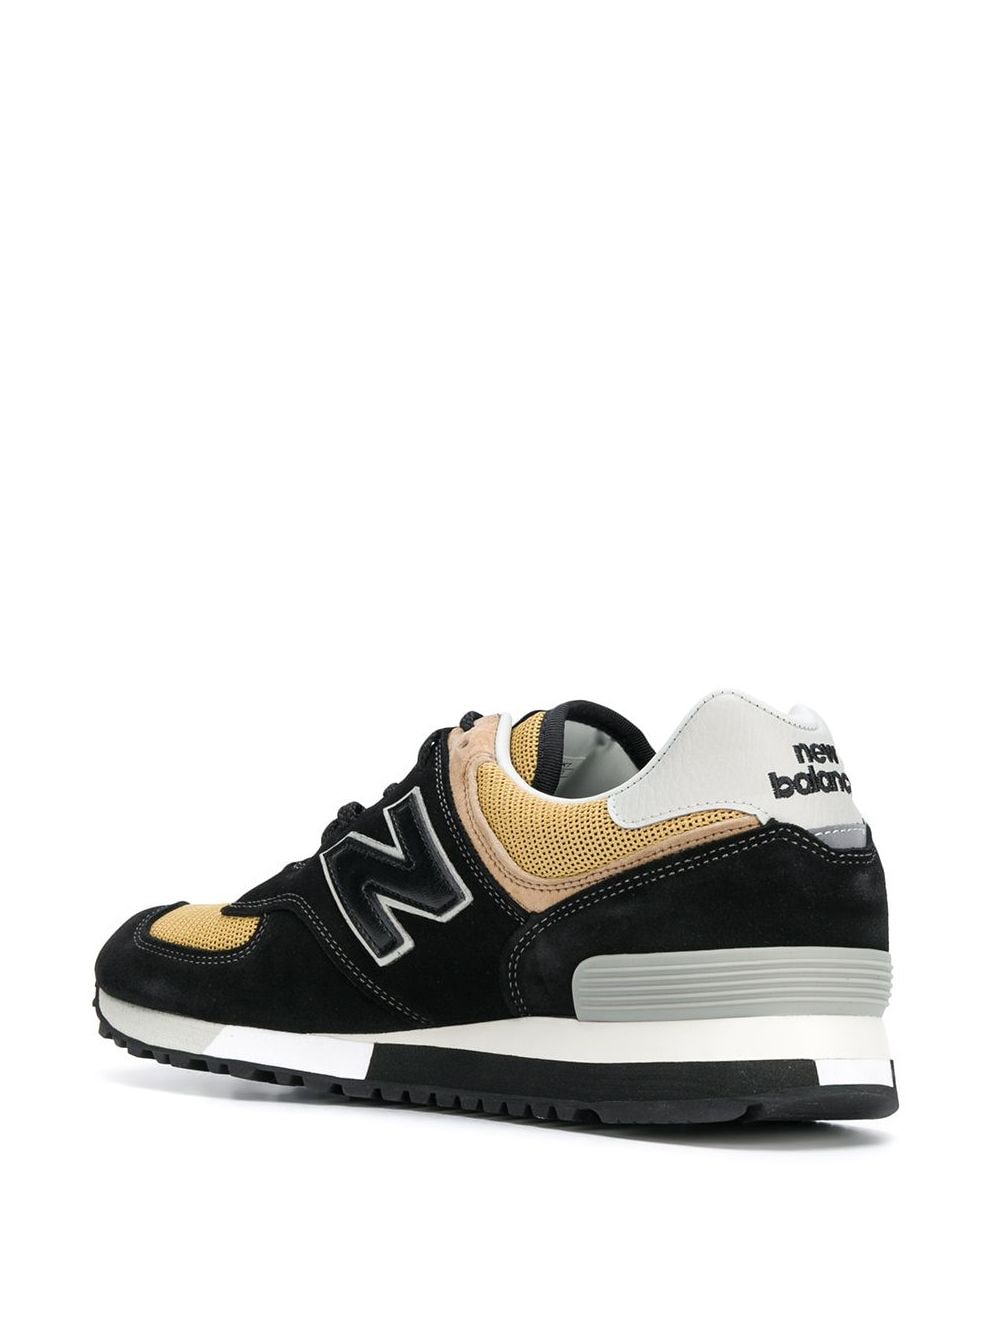 New Balance 576 Sneakers Aw18 